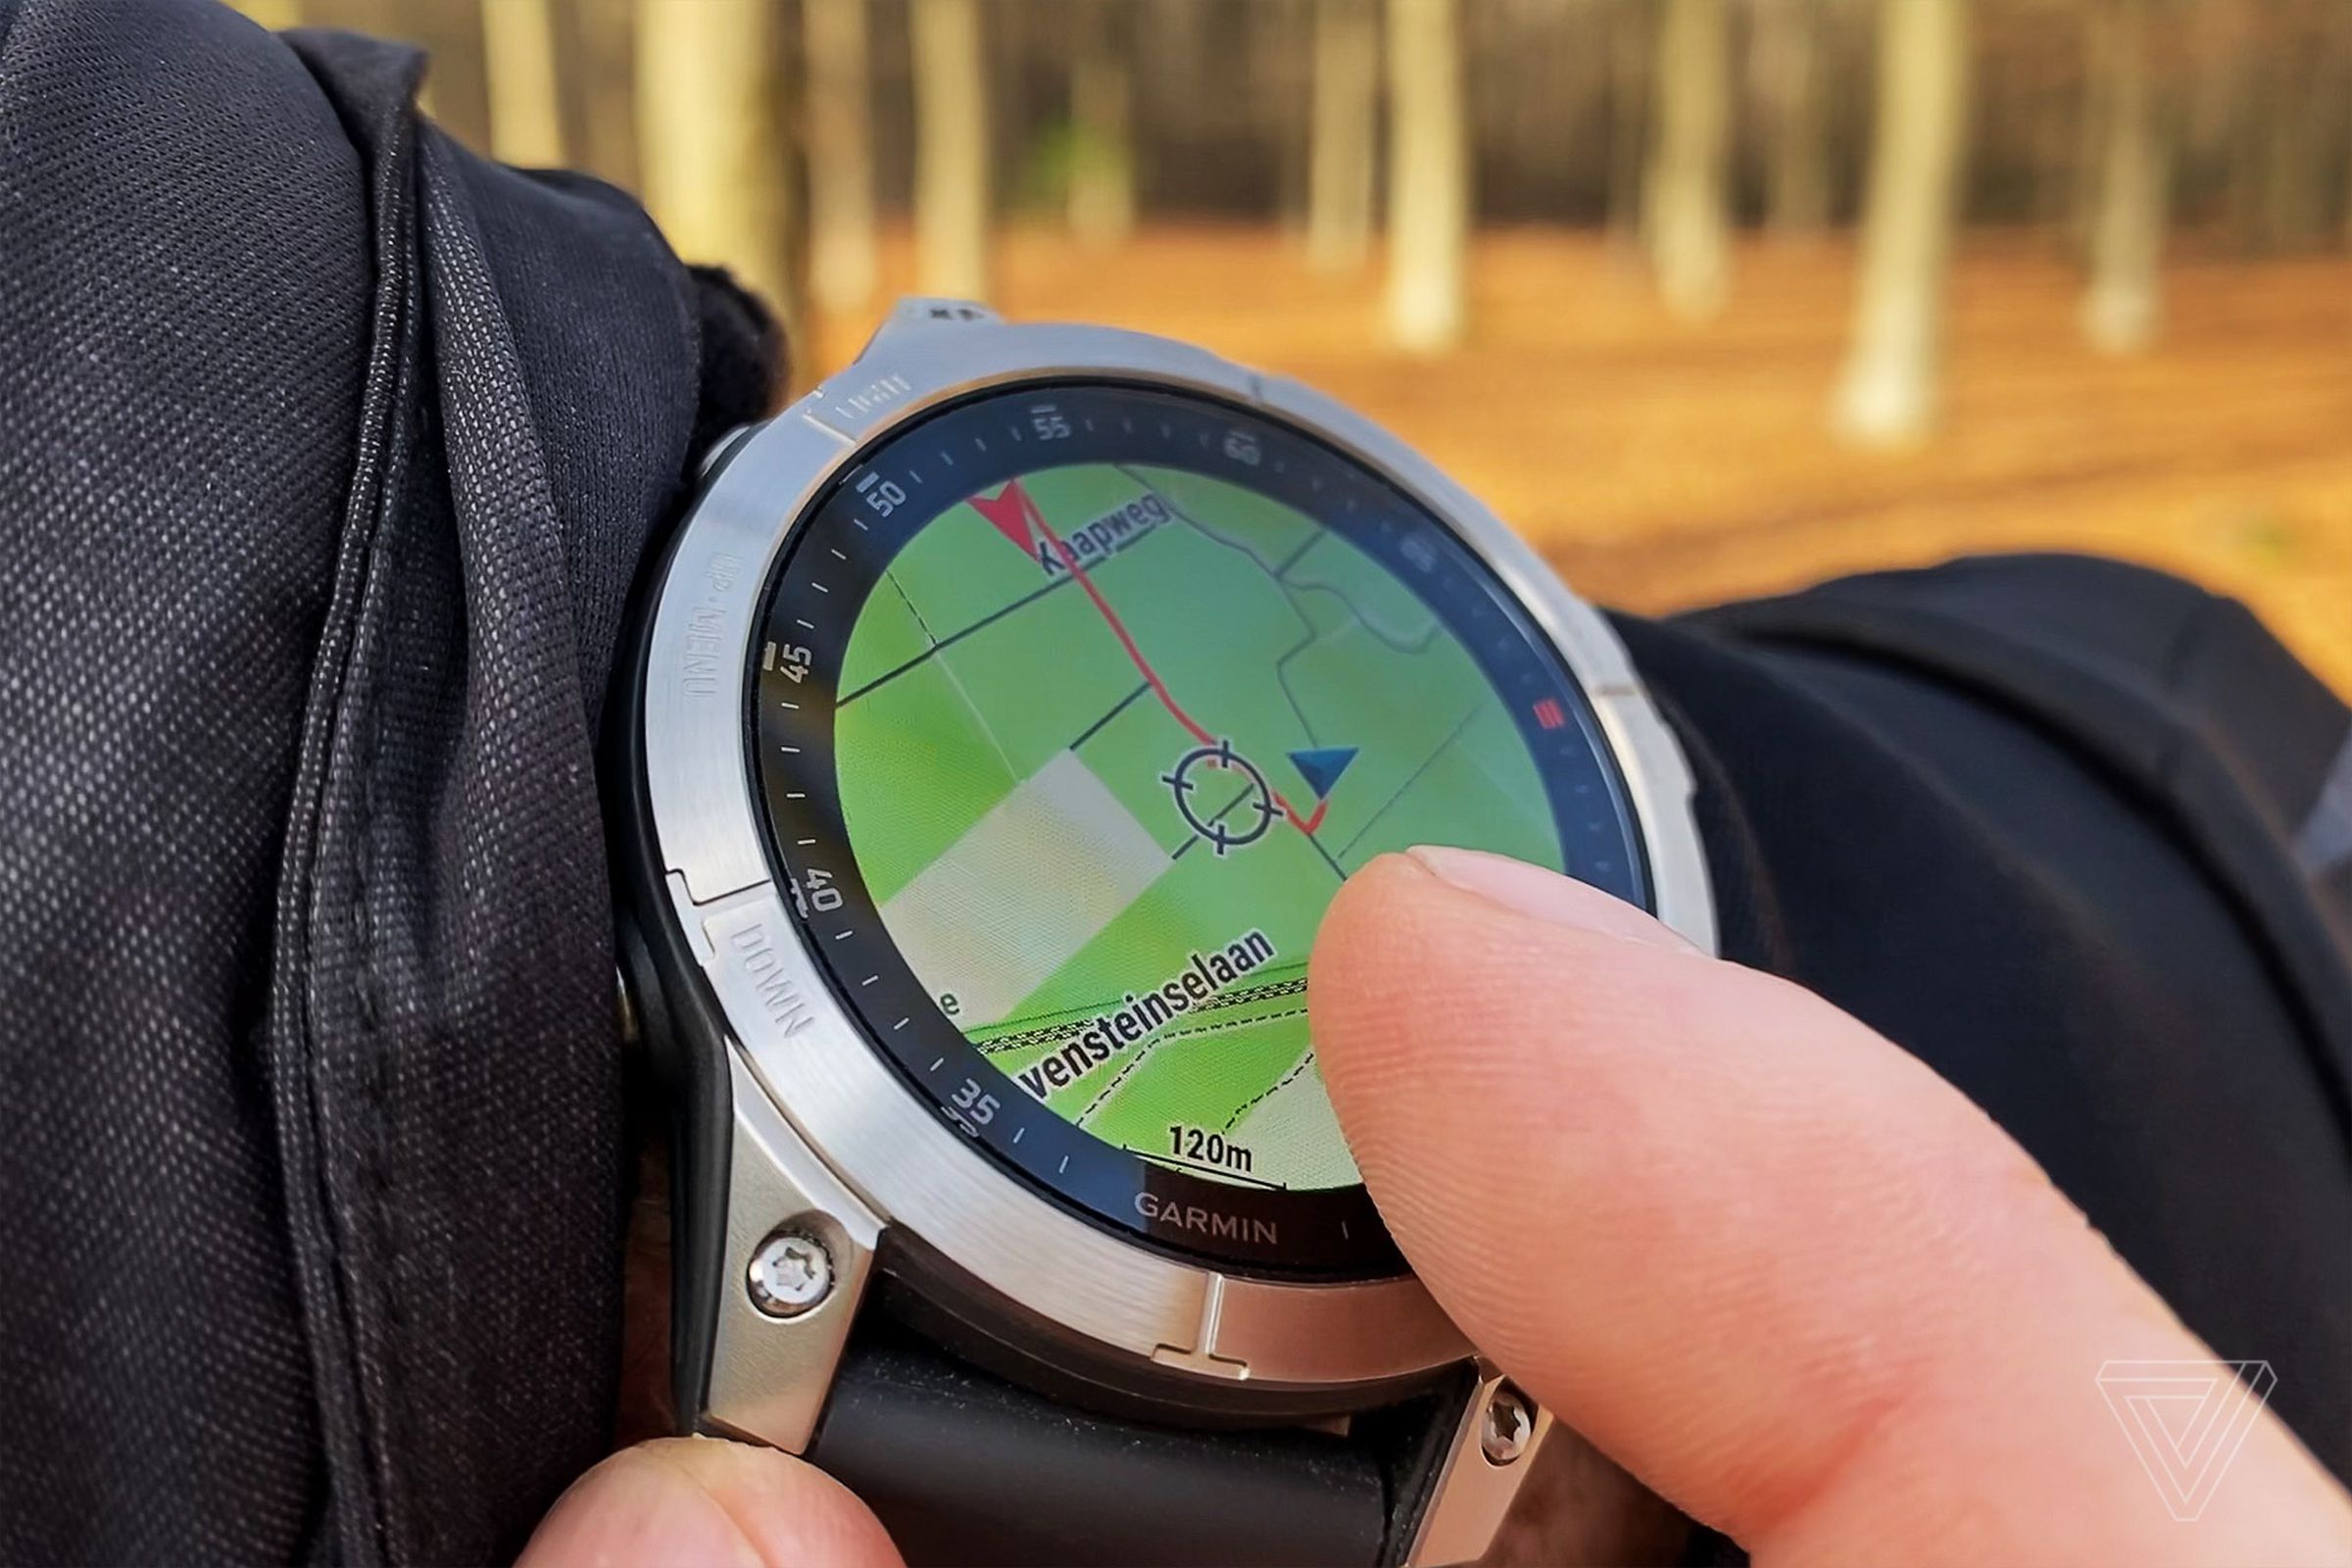 Garmin’s high-end watches like the Epix 2 have OLED displays, multi-frequency GPS, and touchscreens with built-in topographical maps that include trail names and even ski slopes.